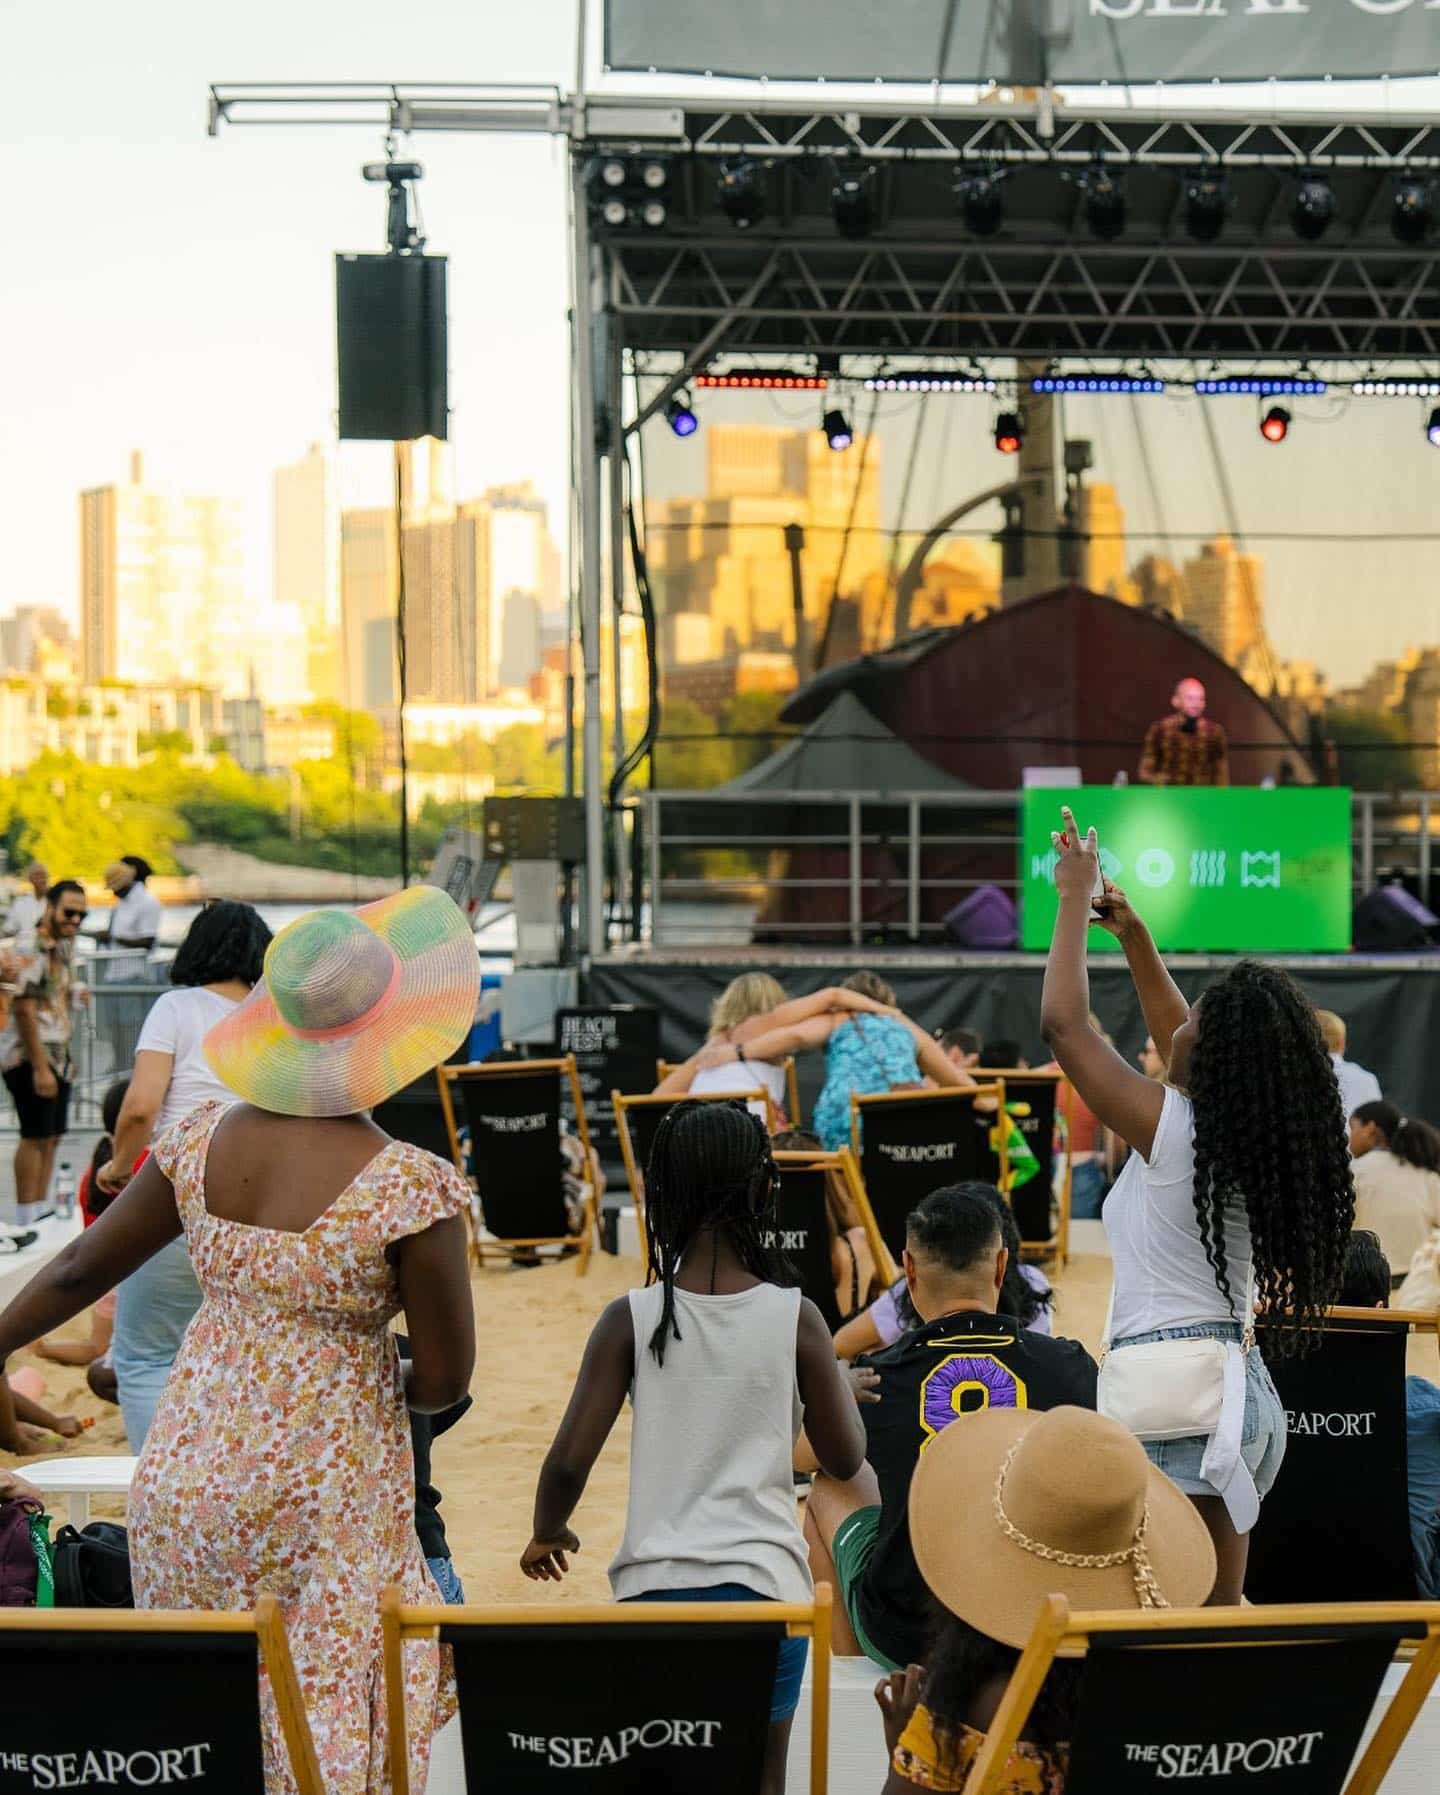 Fun in the sun. Feet in the sand. Live music. Waterfront views. Experience it all right downtown. #TheSeaport Beach Fest will return July 28–30 and we’re bringing the beach to you ️🏖️ July 28  2-7pm DJ sets  7:15pm DJ Walshy Fire  8:30pm DJ mOma July 29 🧘 10:30am #SeaportFit Yoga  2-5pm Opening Performers  5:30pm James Patterson  7pm Marshall Jefferson  8:30pm Sandy Rivera July 30  1-5:45pm Opening Bands  6pm Dalton & The Sheriffs  8pm Wilson Springs Hotel Music for Beach Fest is brought to you by #SeaportSounds, presented by Heineken. Details ➤ link in bio